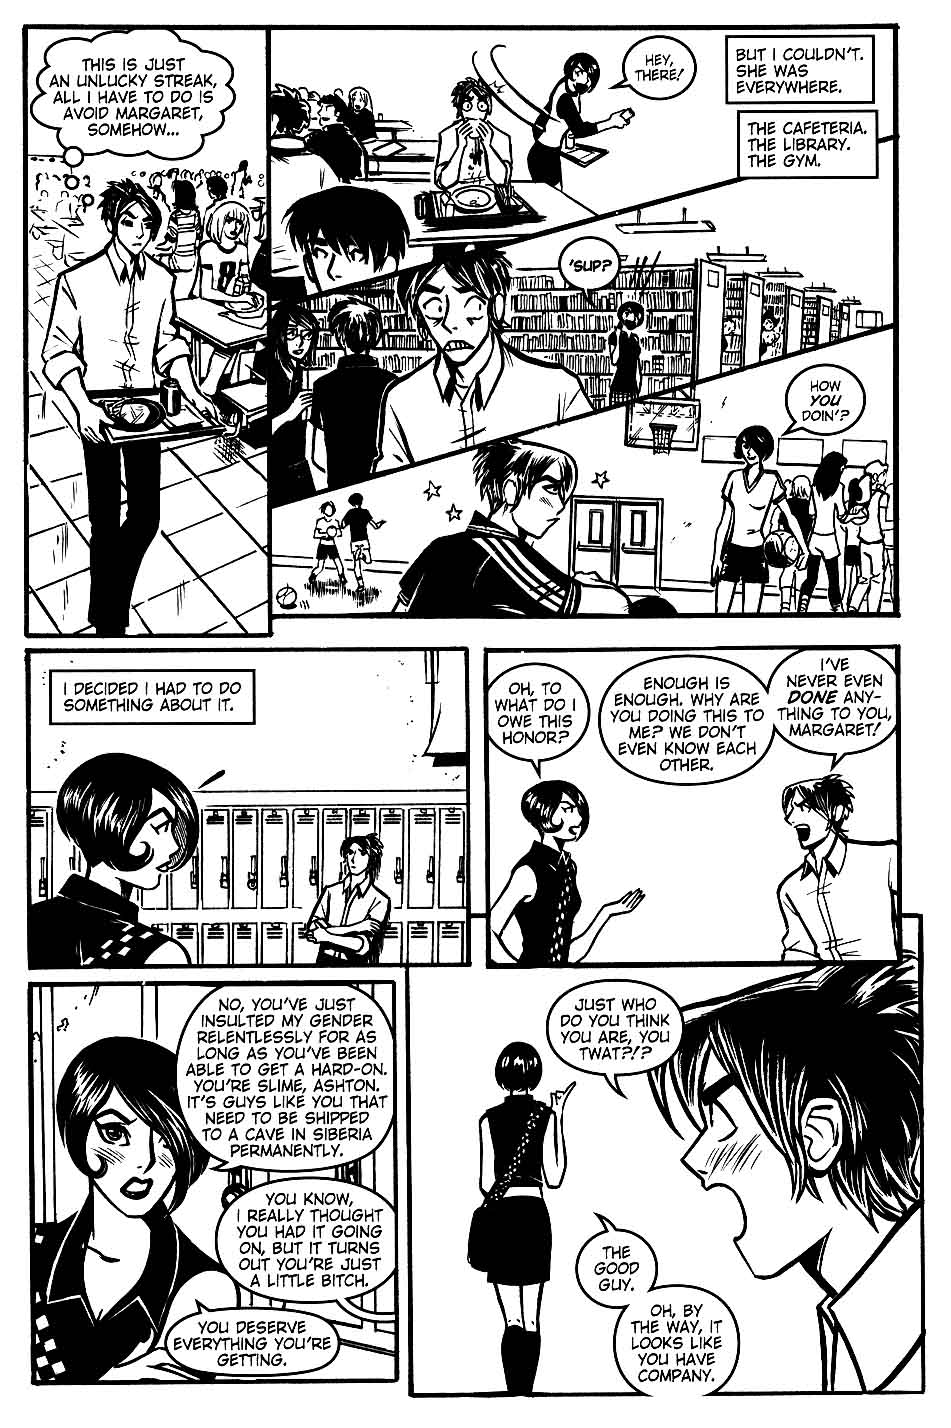 om Eller senere Profet Scooter Girl Issue 1 | Read Scooter Girl Issue 1 comic online in high  quality. Read Full Comic online for free - Read comics online in high  quality .| READ COMIC ONLINE